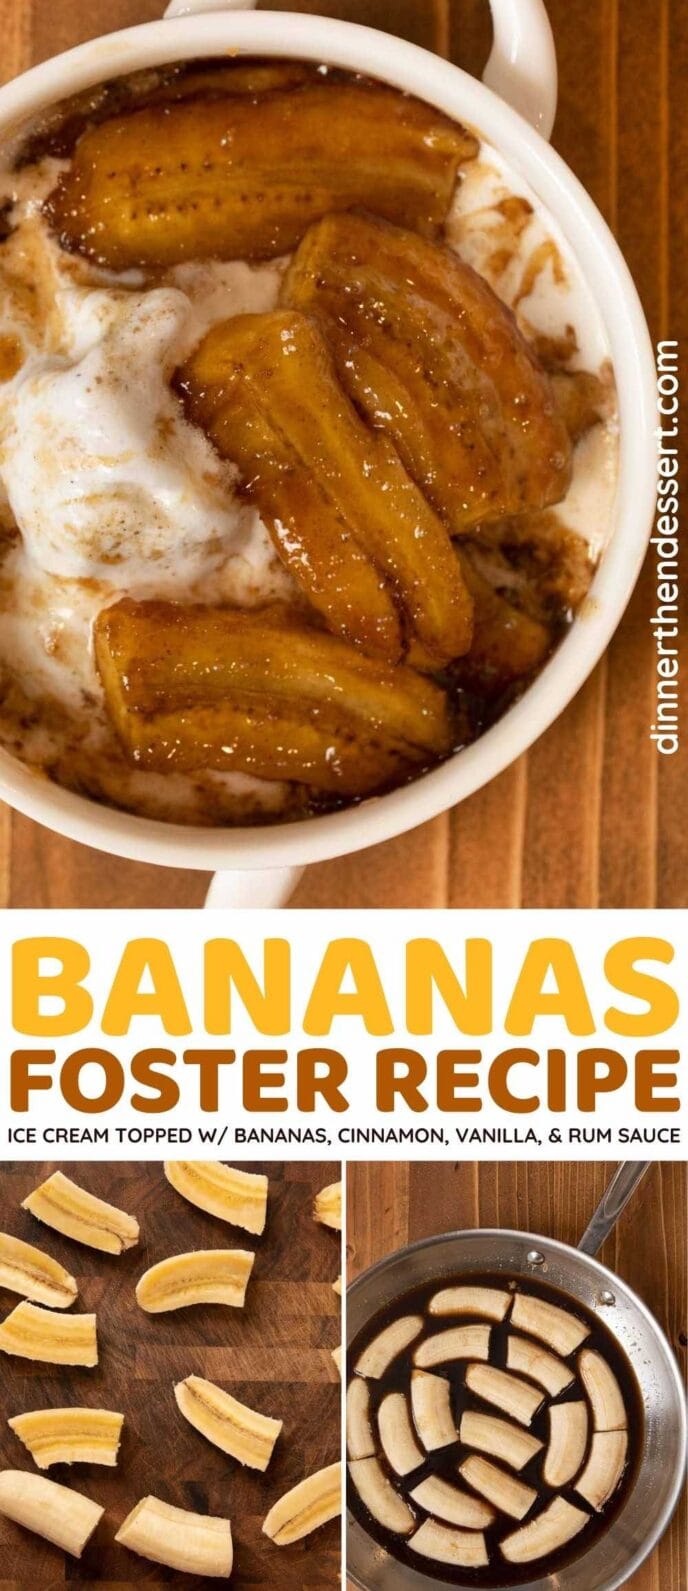 Bananas Foster collage